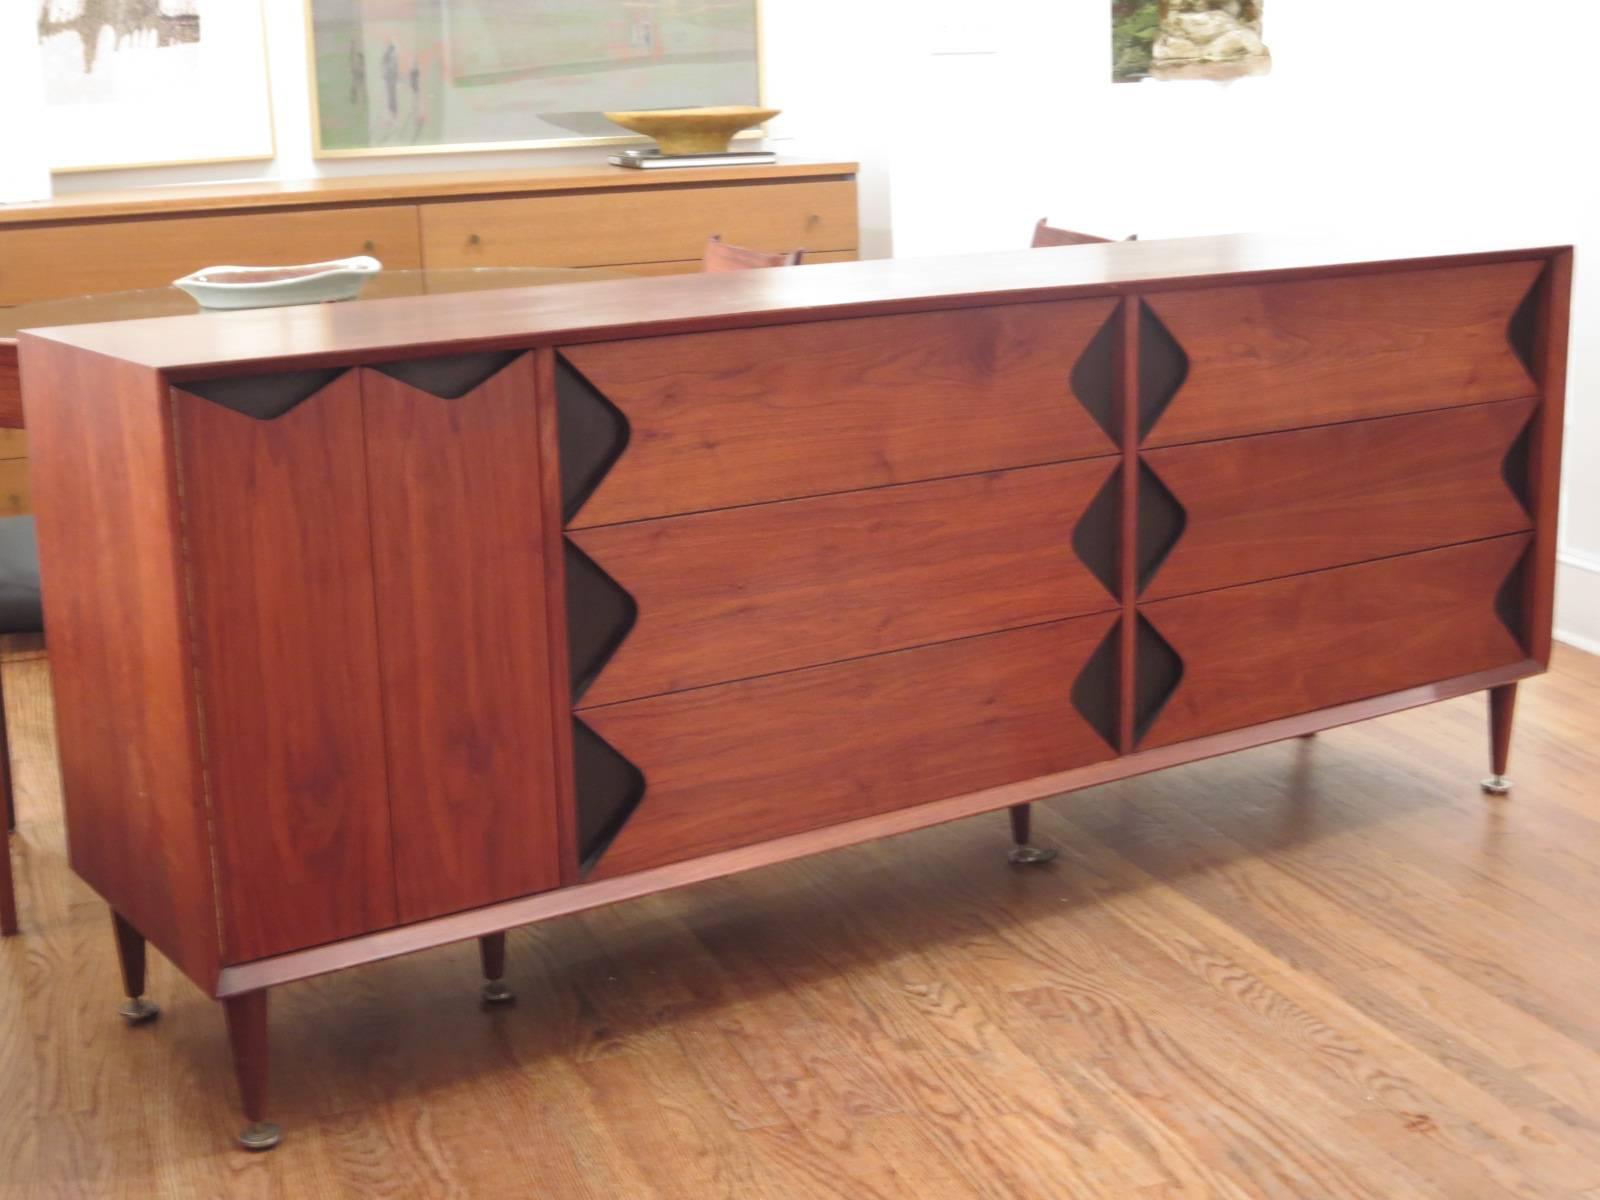 Large walnut two-tone credenza or dresser in very nice vintage condition. Cabinet door is hinged with interior shelves. Six large drawers provide great storage. Handles are recessed adding to overall design.